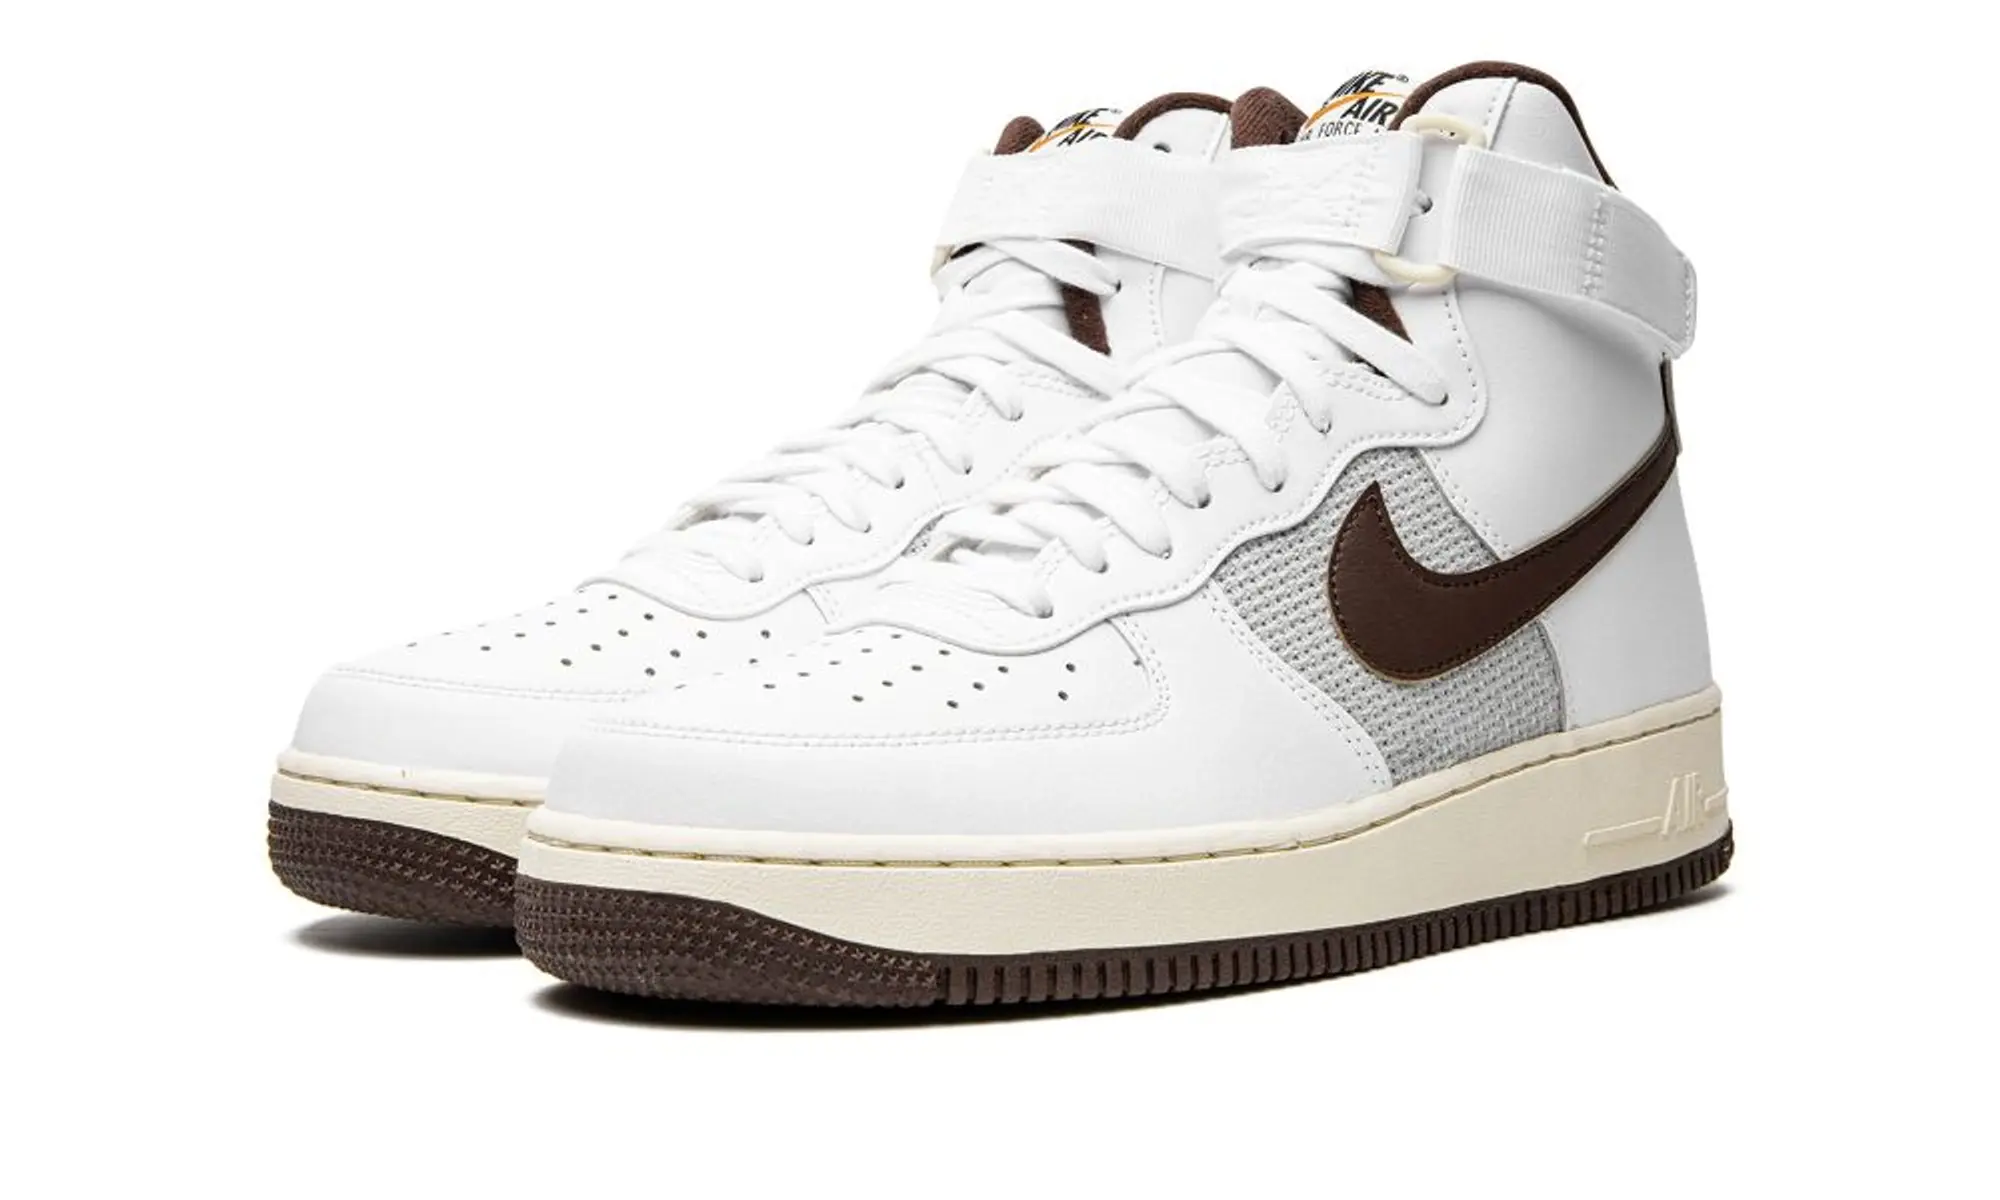 Nike Air Force 1 High '07 White Light Chocolate Shoes